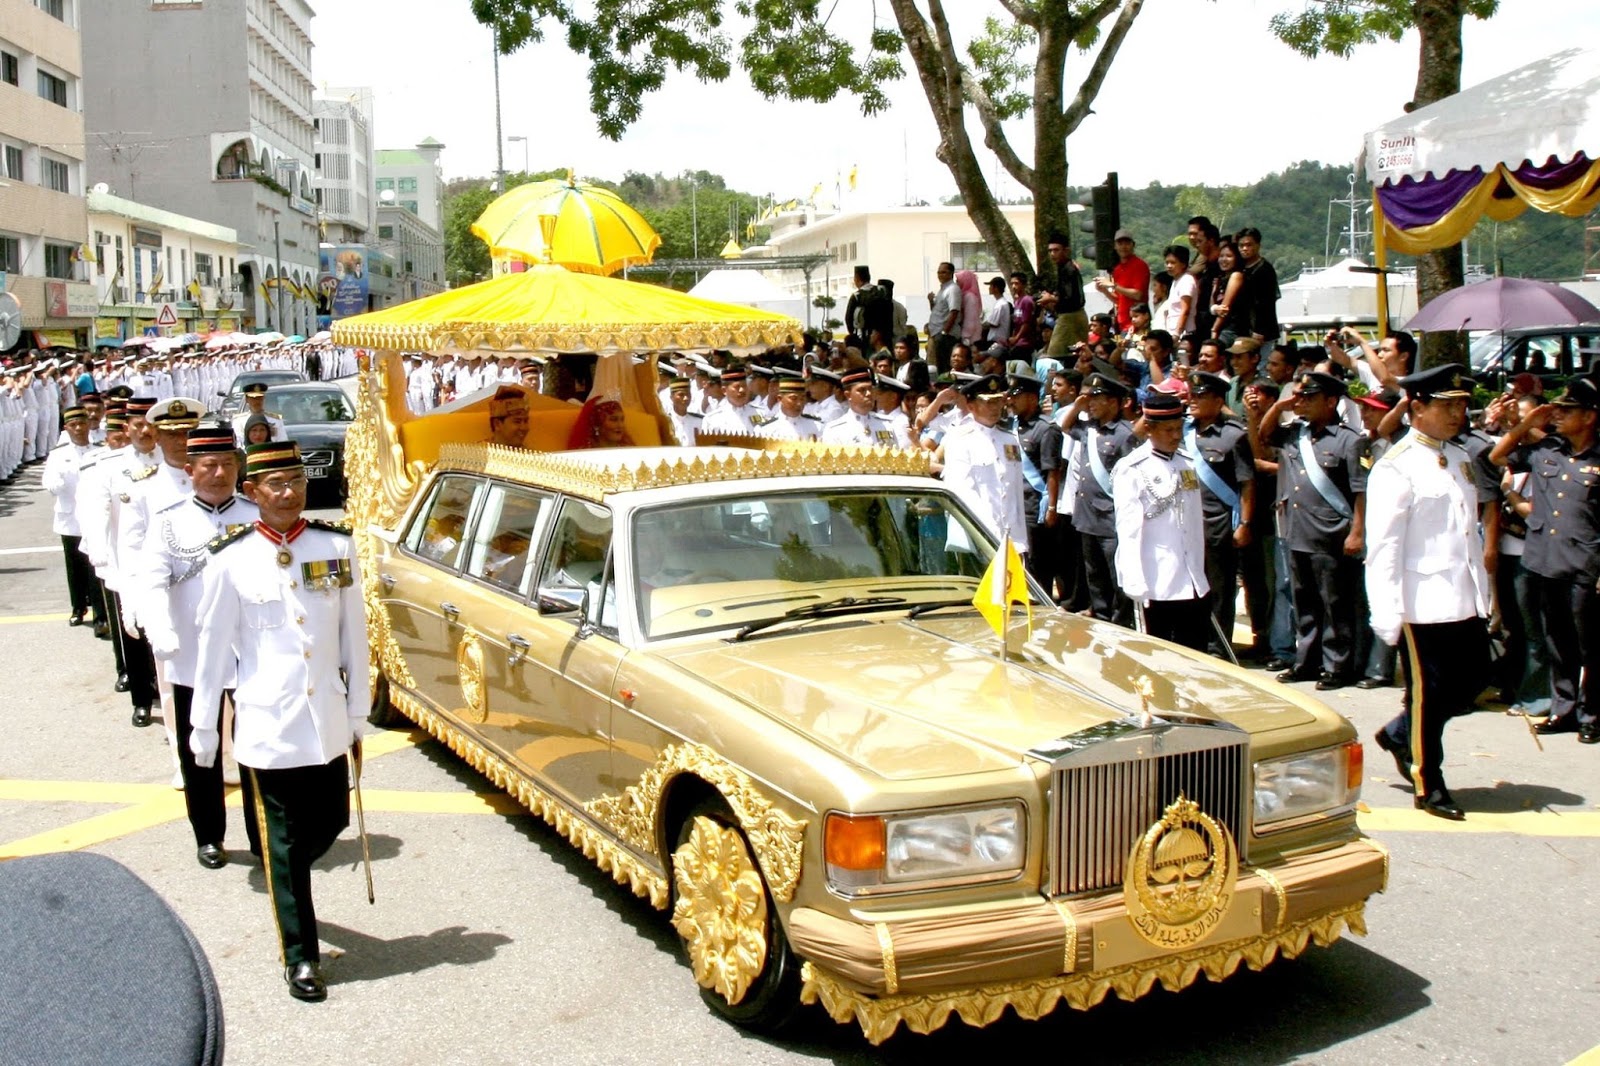 Just A Car Guy the wedding car of the Sultan of Brunei